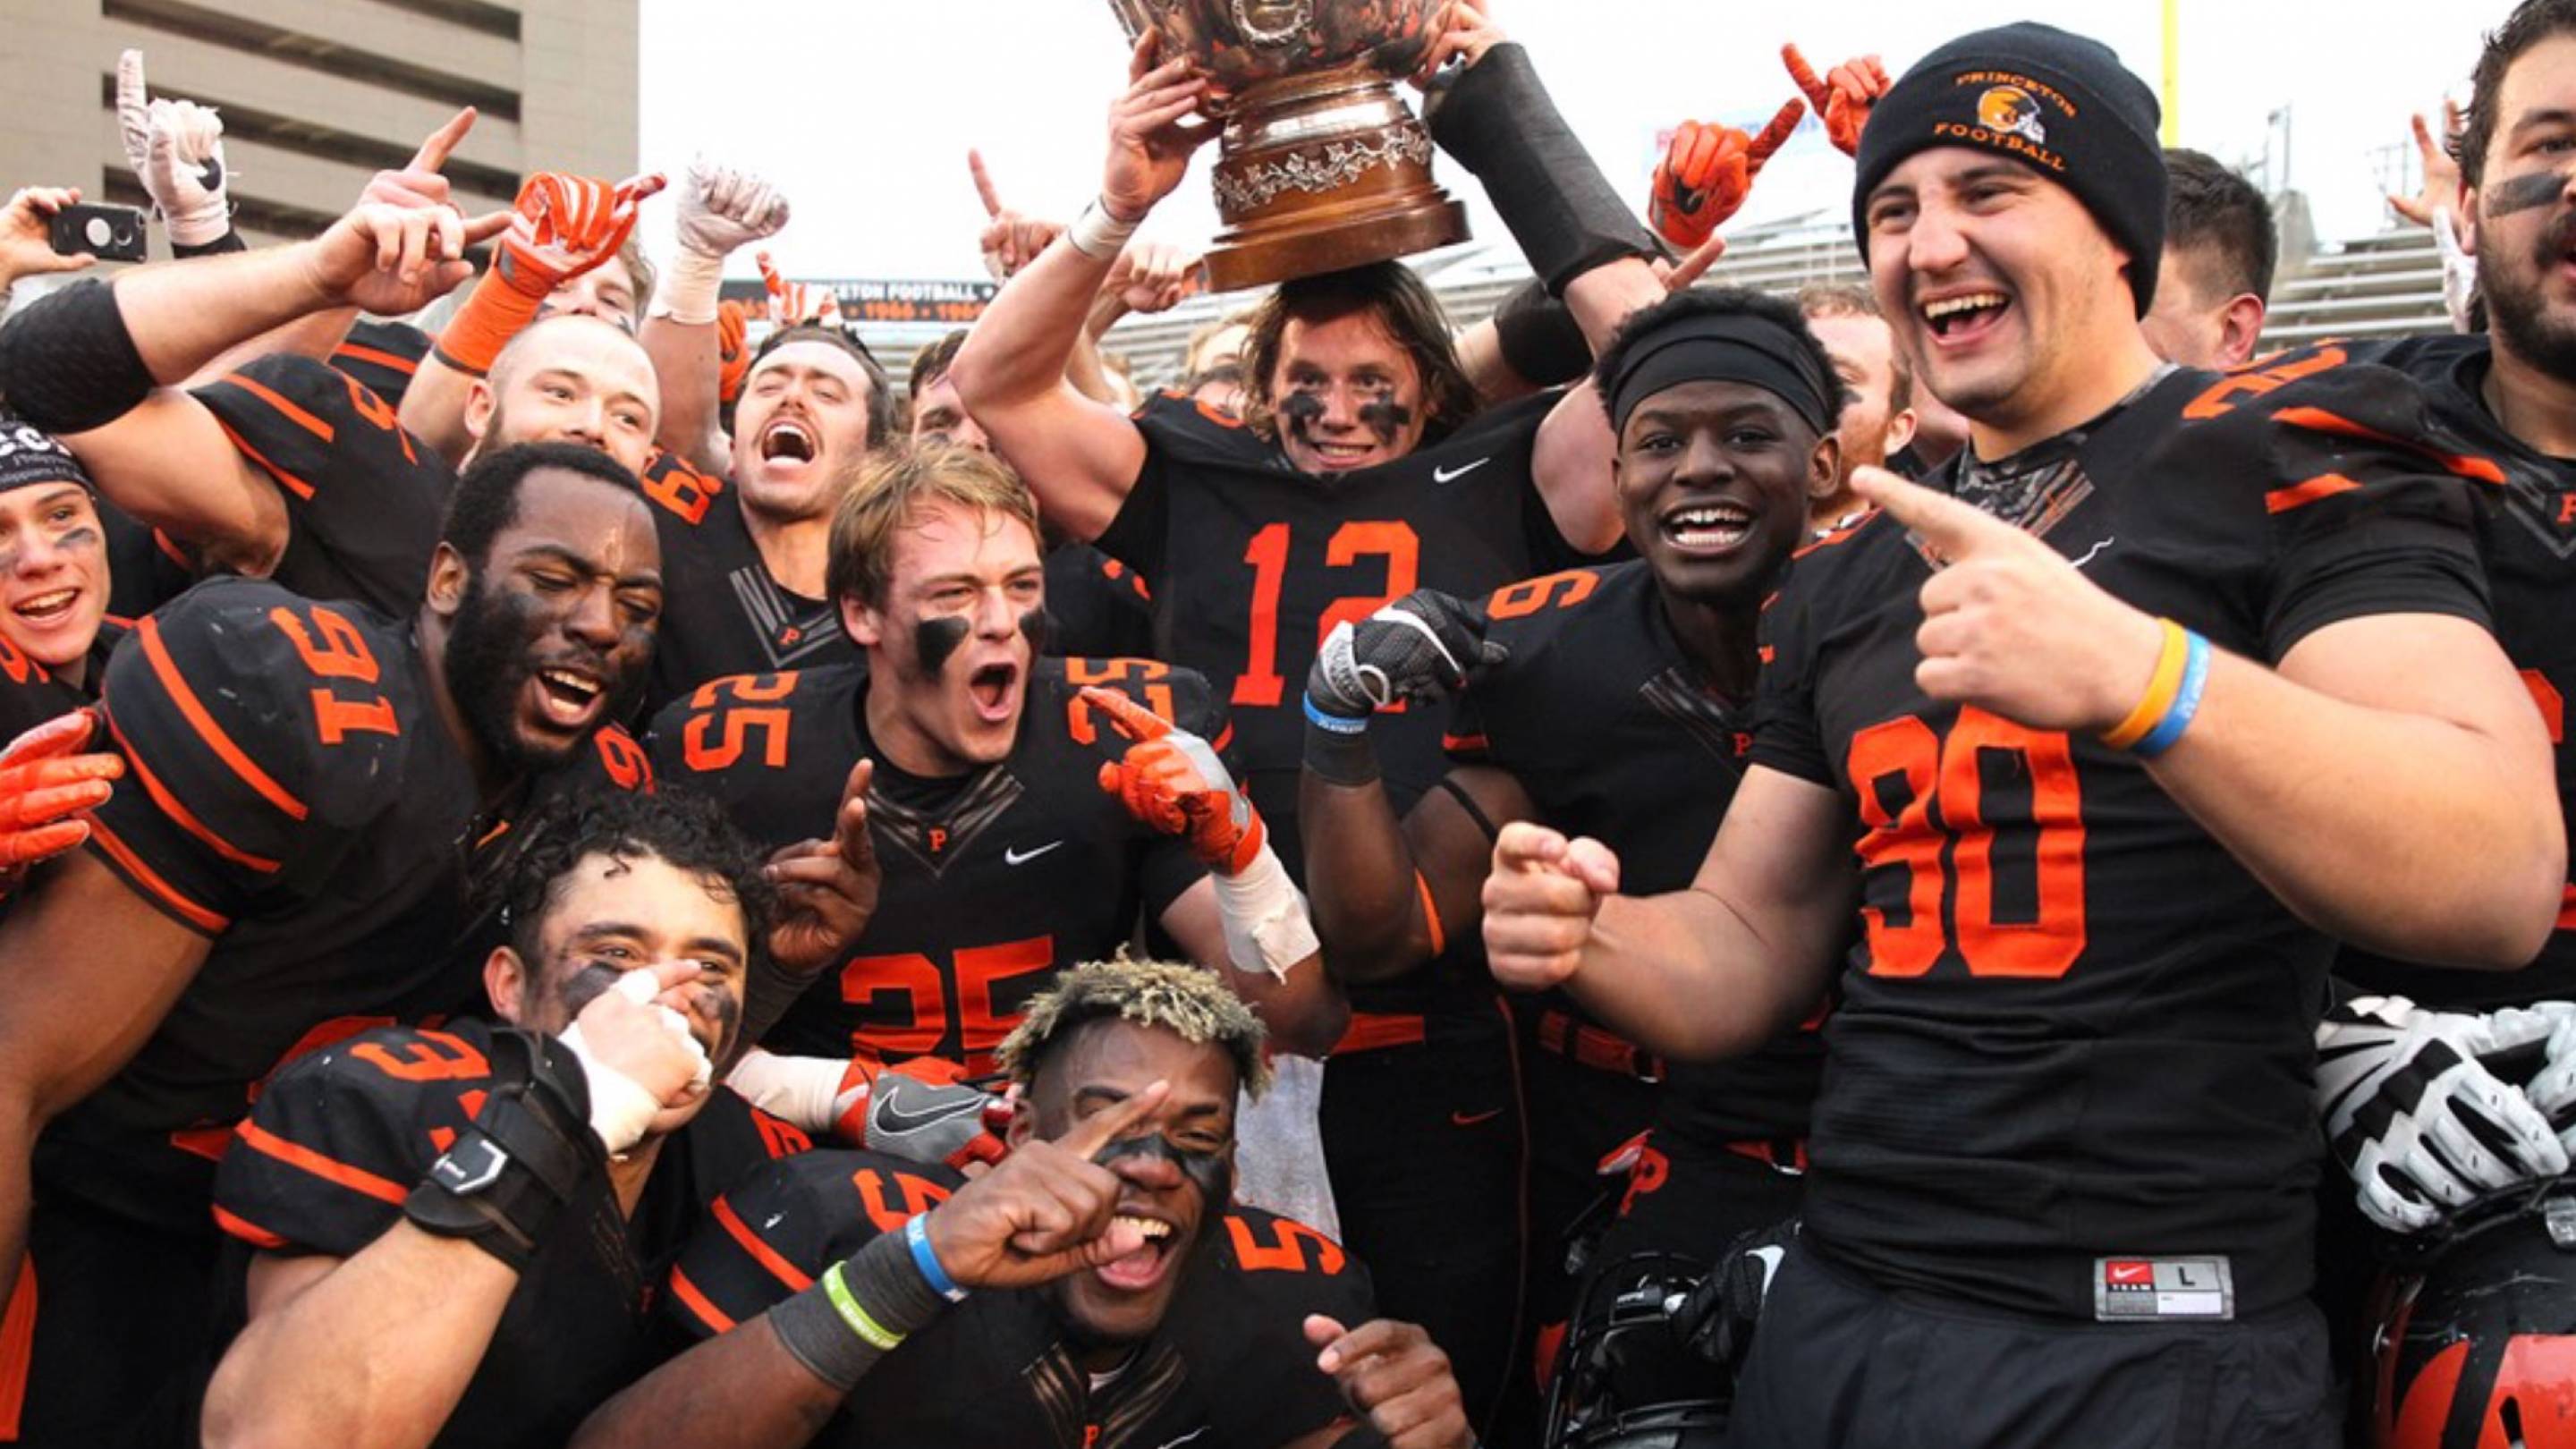 Princeton Tigers celebrate 150 years of college football